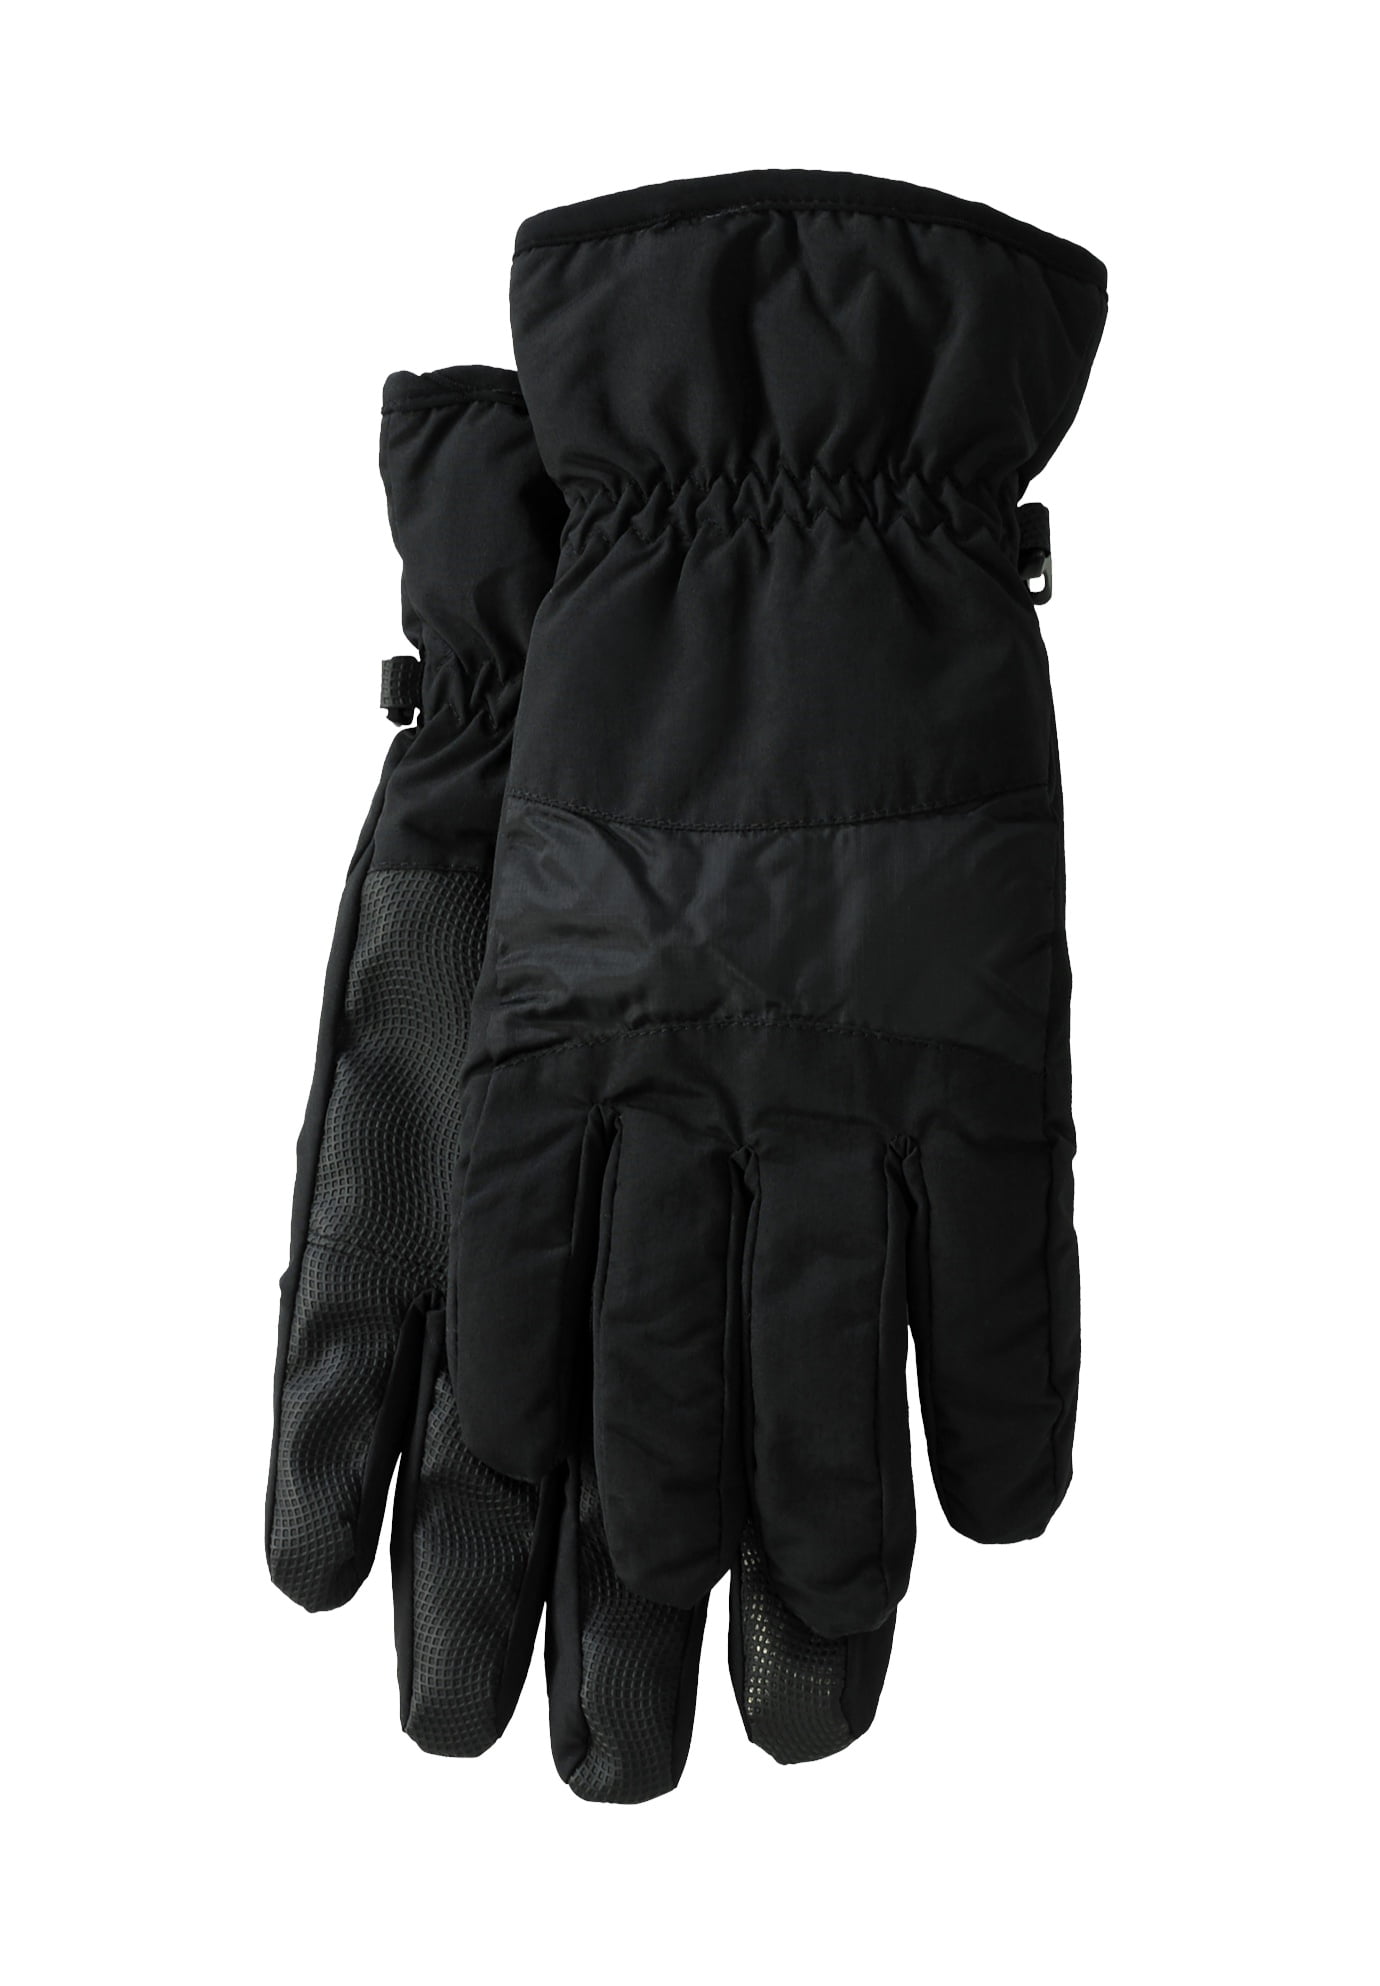 Adults Old Navy Winter Gloves Black Size S-M NWT Cutoff Fingers 